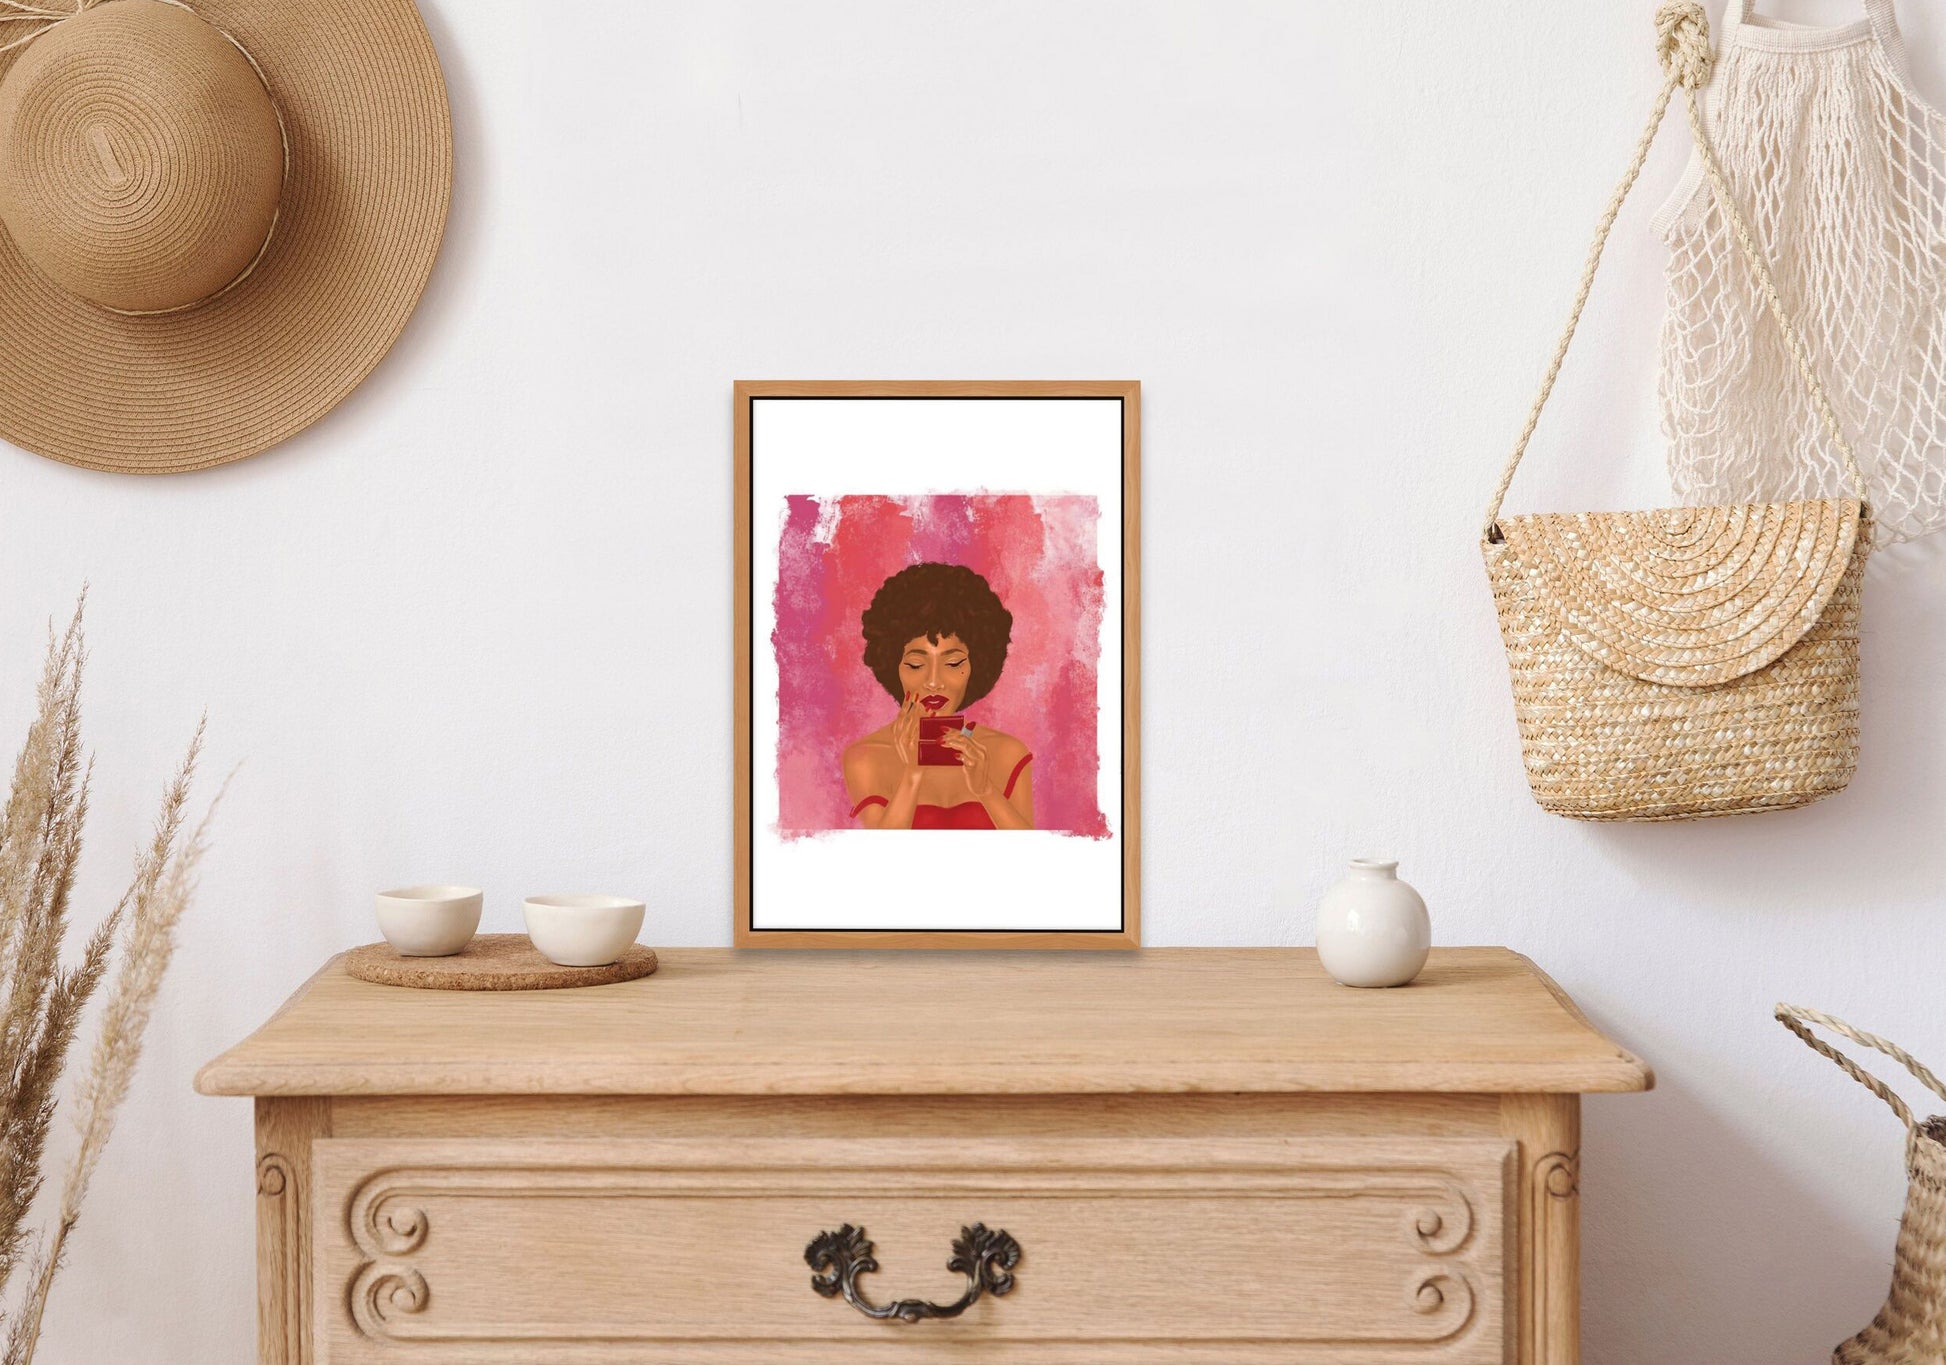 Wall print of an African American woman wearing lipstick sitting on top of a chest of drawers